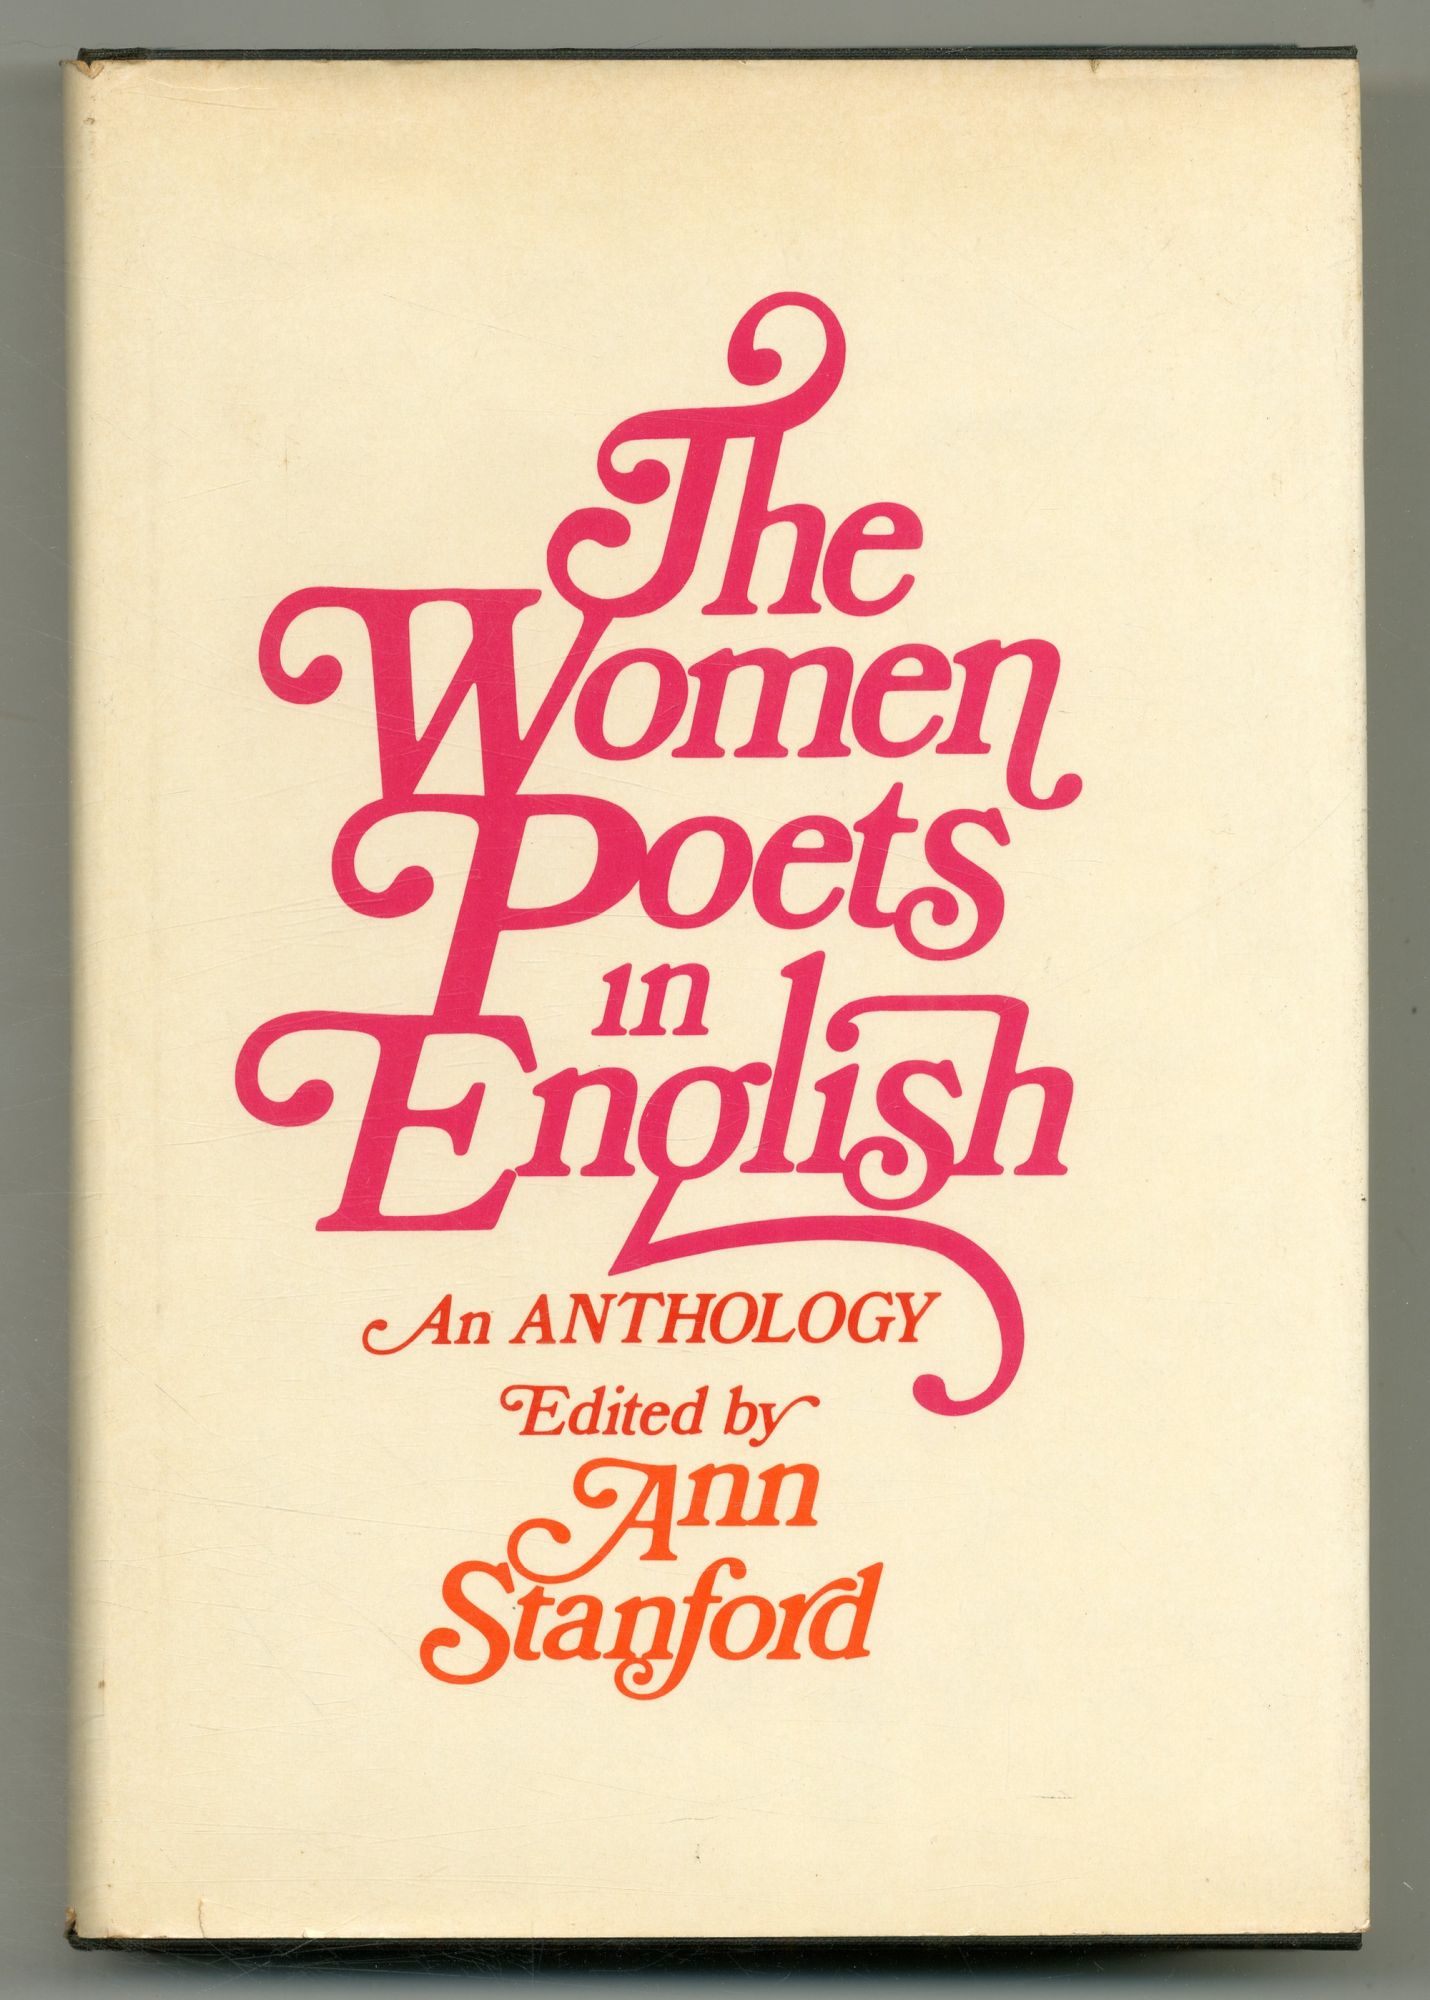 The Women Poets in English, by author Ann Stanford